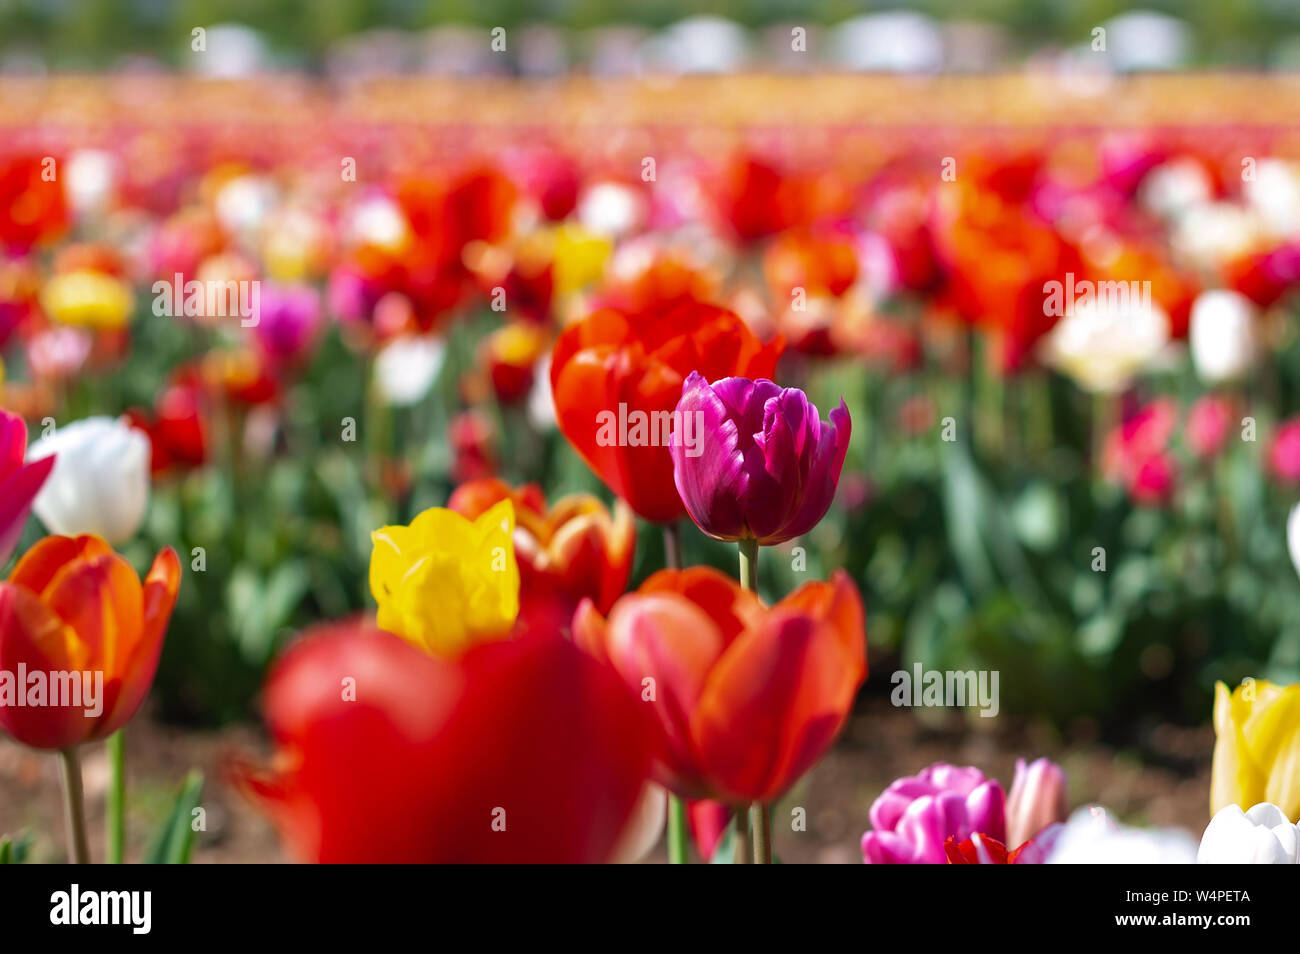 Blooming tulip field, flower with green leaf in sunlight with blurrred colorful tulips as background. Postcard beauty decoration and agriculture conce Stock Photo